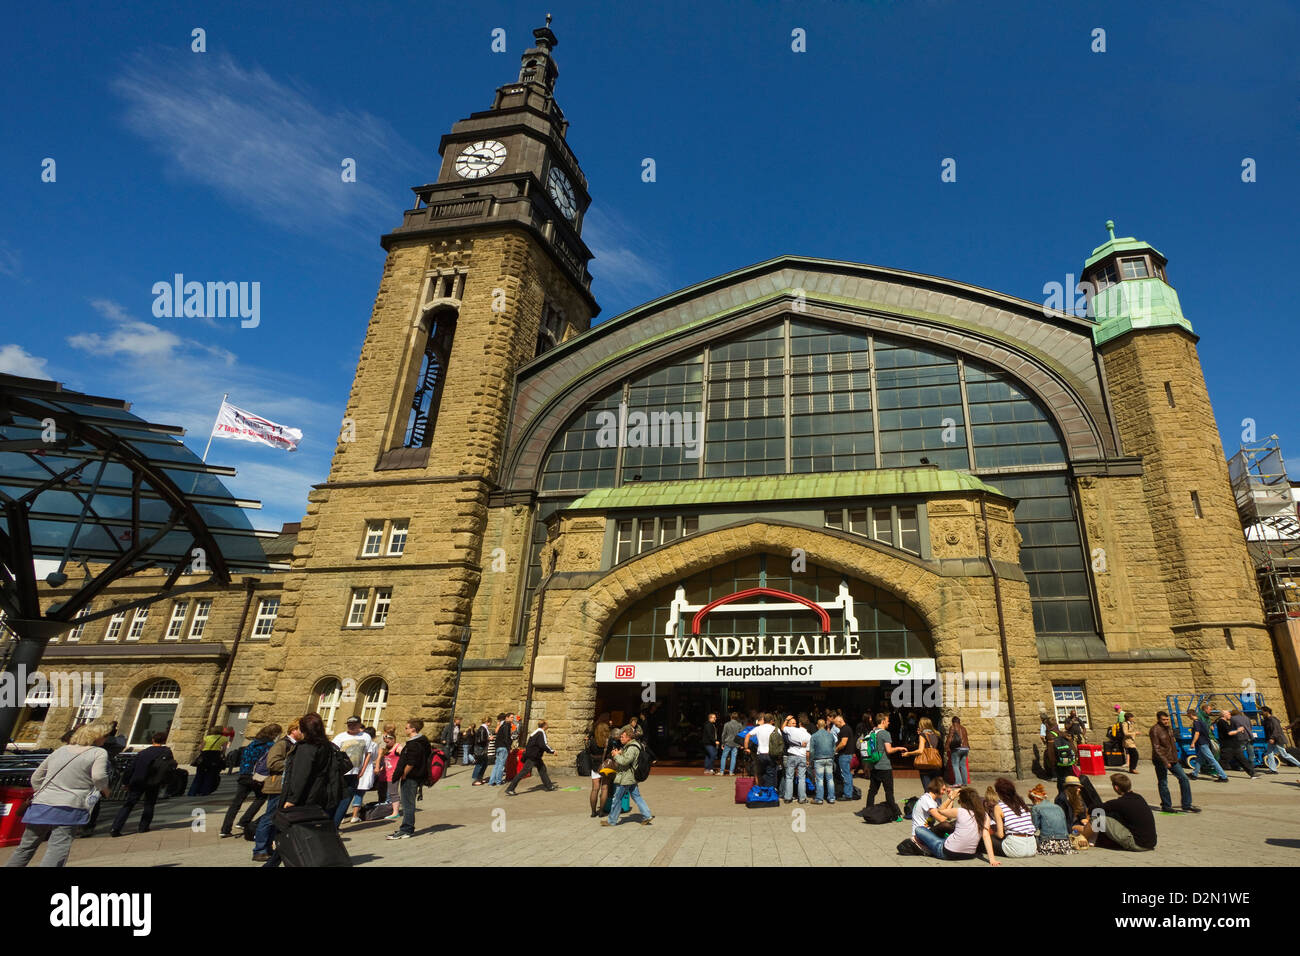 The Wandelhalle (Promenade Hall) entrance to a shopping centre in the railway Central Station on Steintorwall, Hamburg, Germany Stock Photo